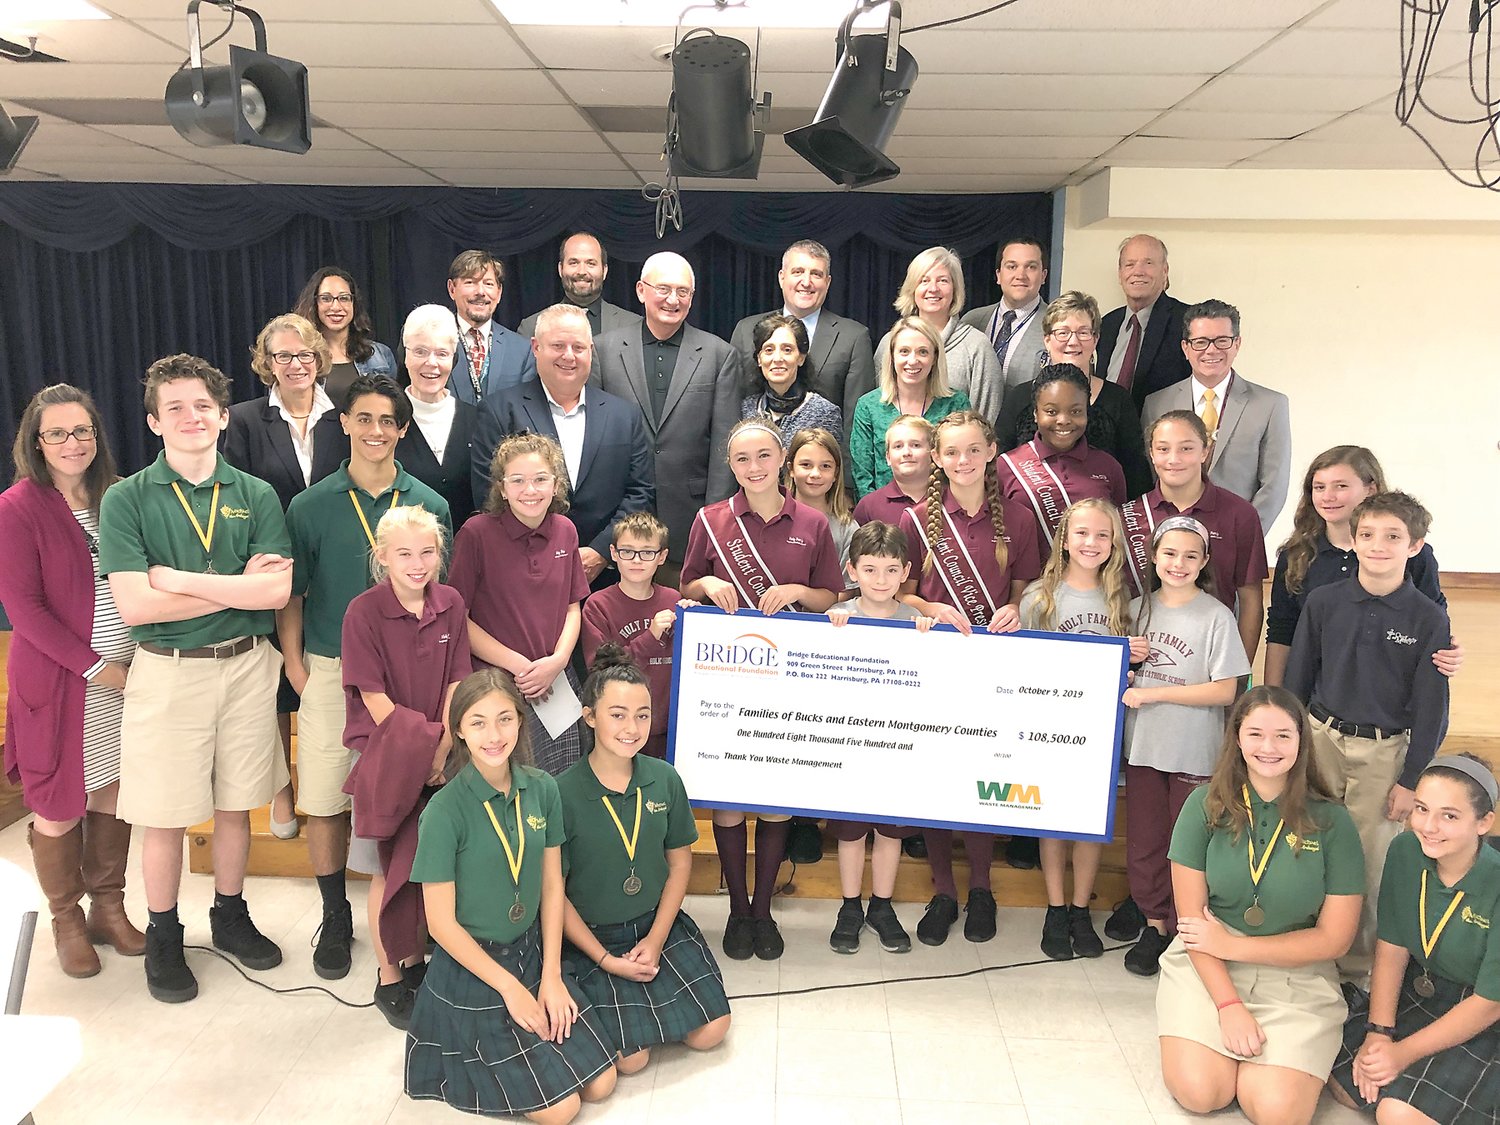 Bridge Educational Foundation has awarded $108,500 in tuition scholarships to local families through the Educational Improvement Tax Credit (EITC) Program. The announcement was made during a ceremony at  Holy Family Regional Catholic School Oct. 9.